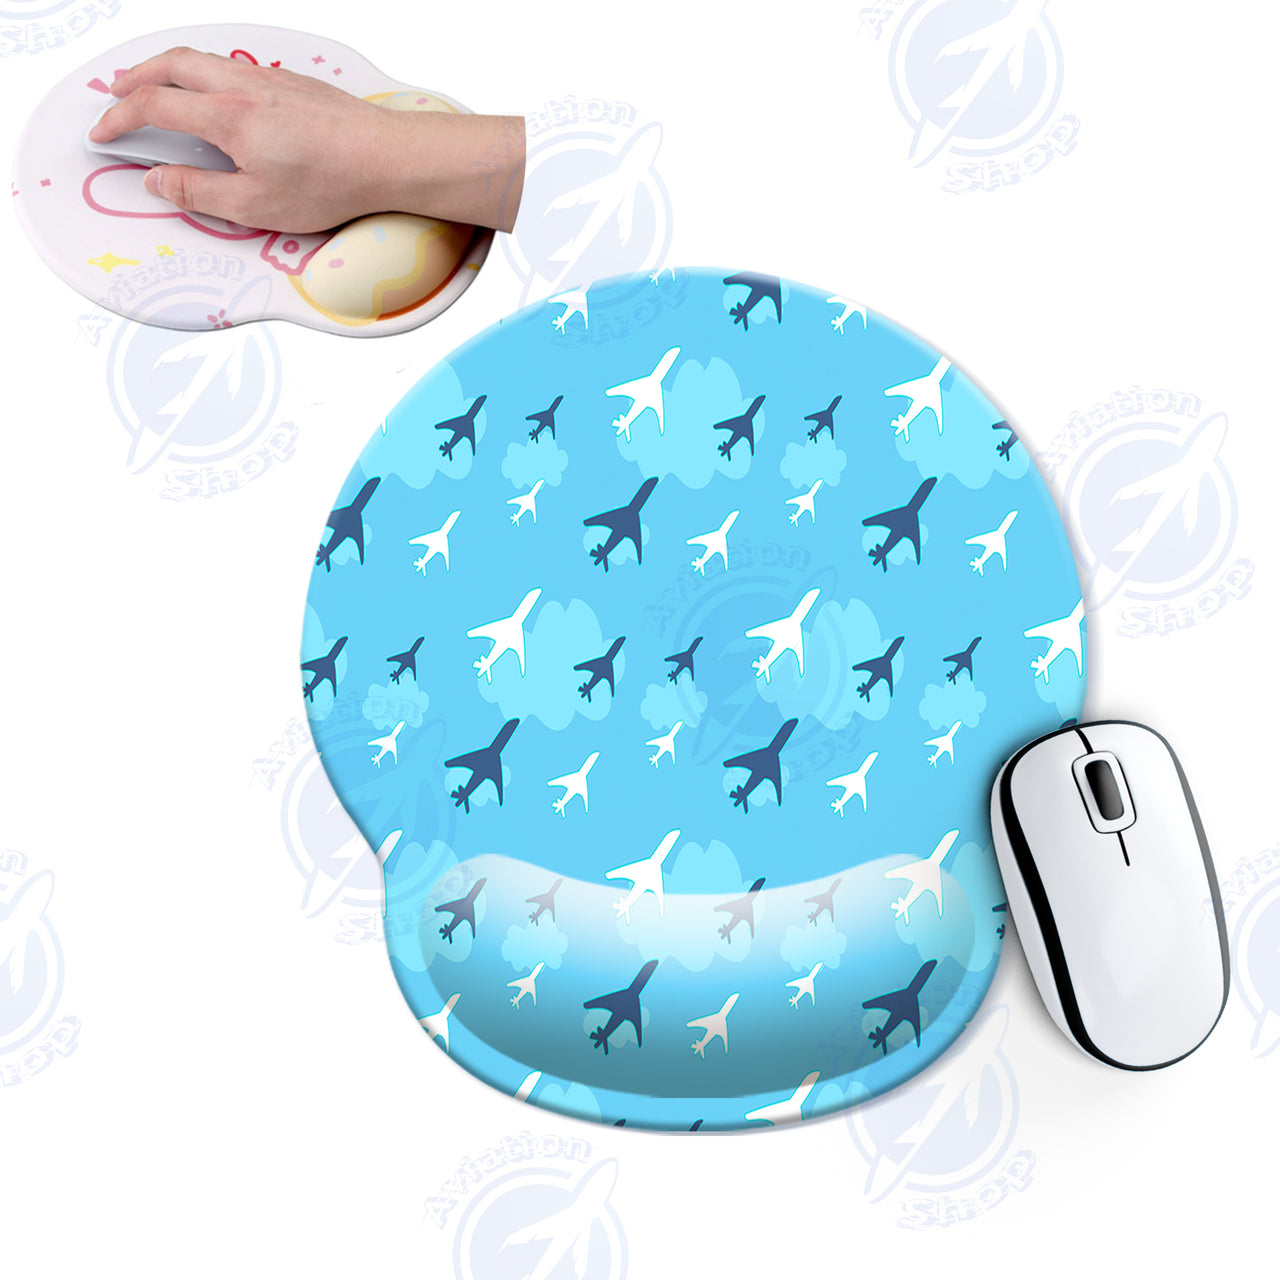 Cool & Super Airplanes Designed Ergonomic Mouse Pads